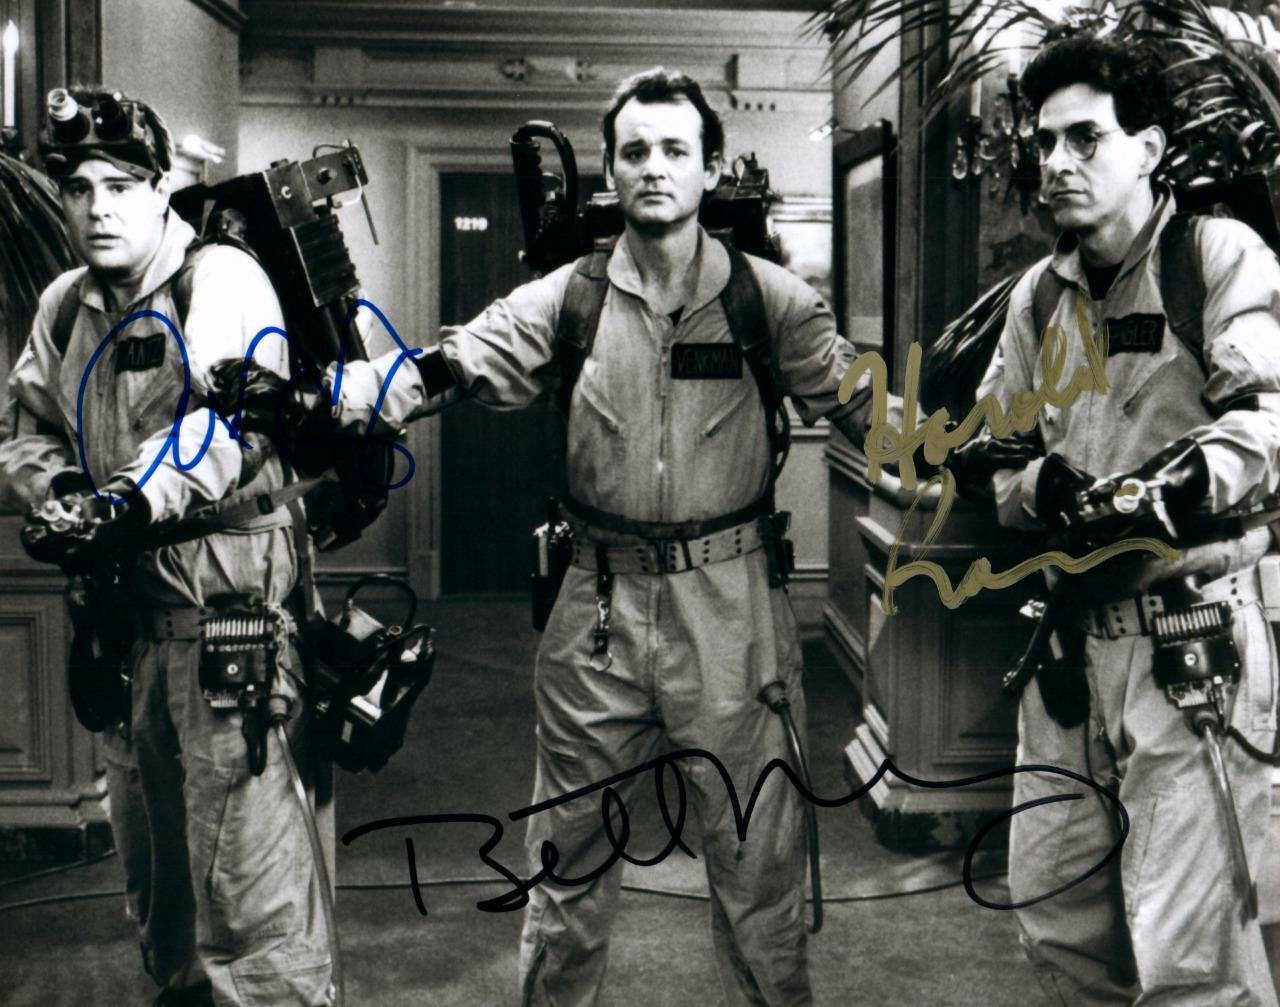 Dan Aykroyd Murray Harold Ramis signed 8x10 Photo Poster painting autographed Picture Pic COA